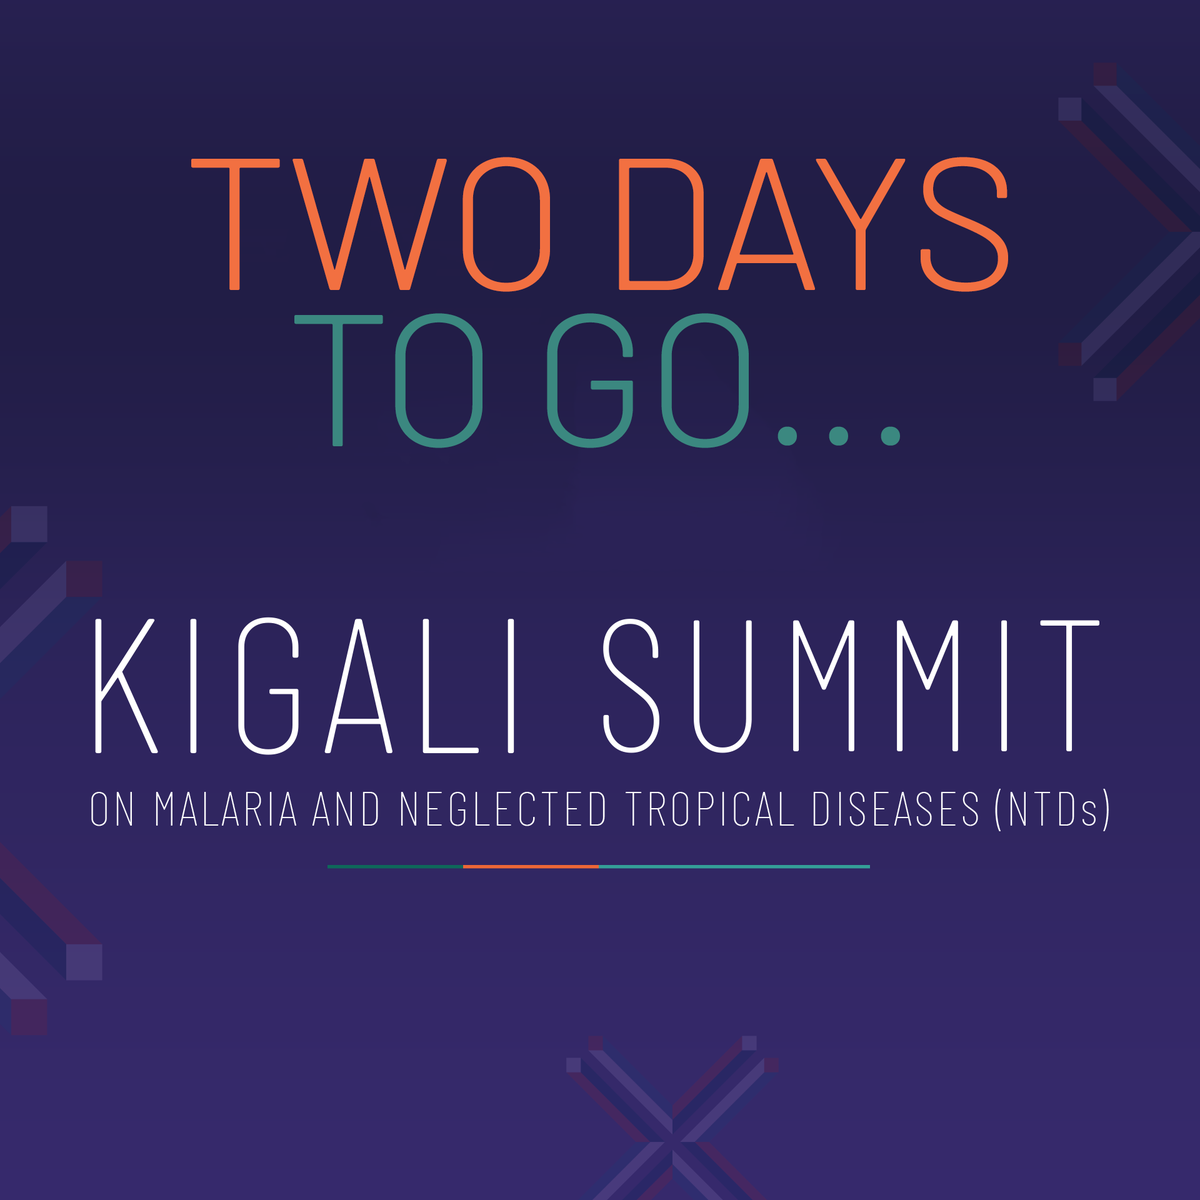 Despite progress, malaria and NTDs still thrive. We cannot allow half the world to continue to suffer from preventable and treatable diseases. In 2 days' time, at the #KigaliSummit, world leaders will reaffirm commitments to #UnlockthePotential and save millions of lives